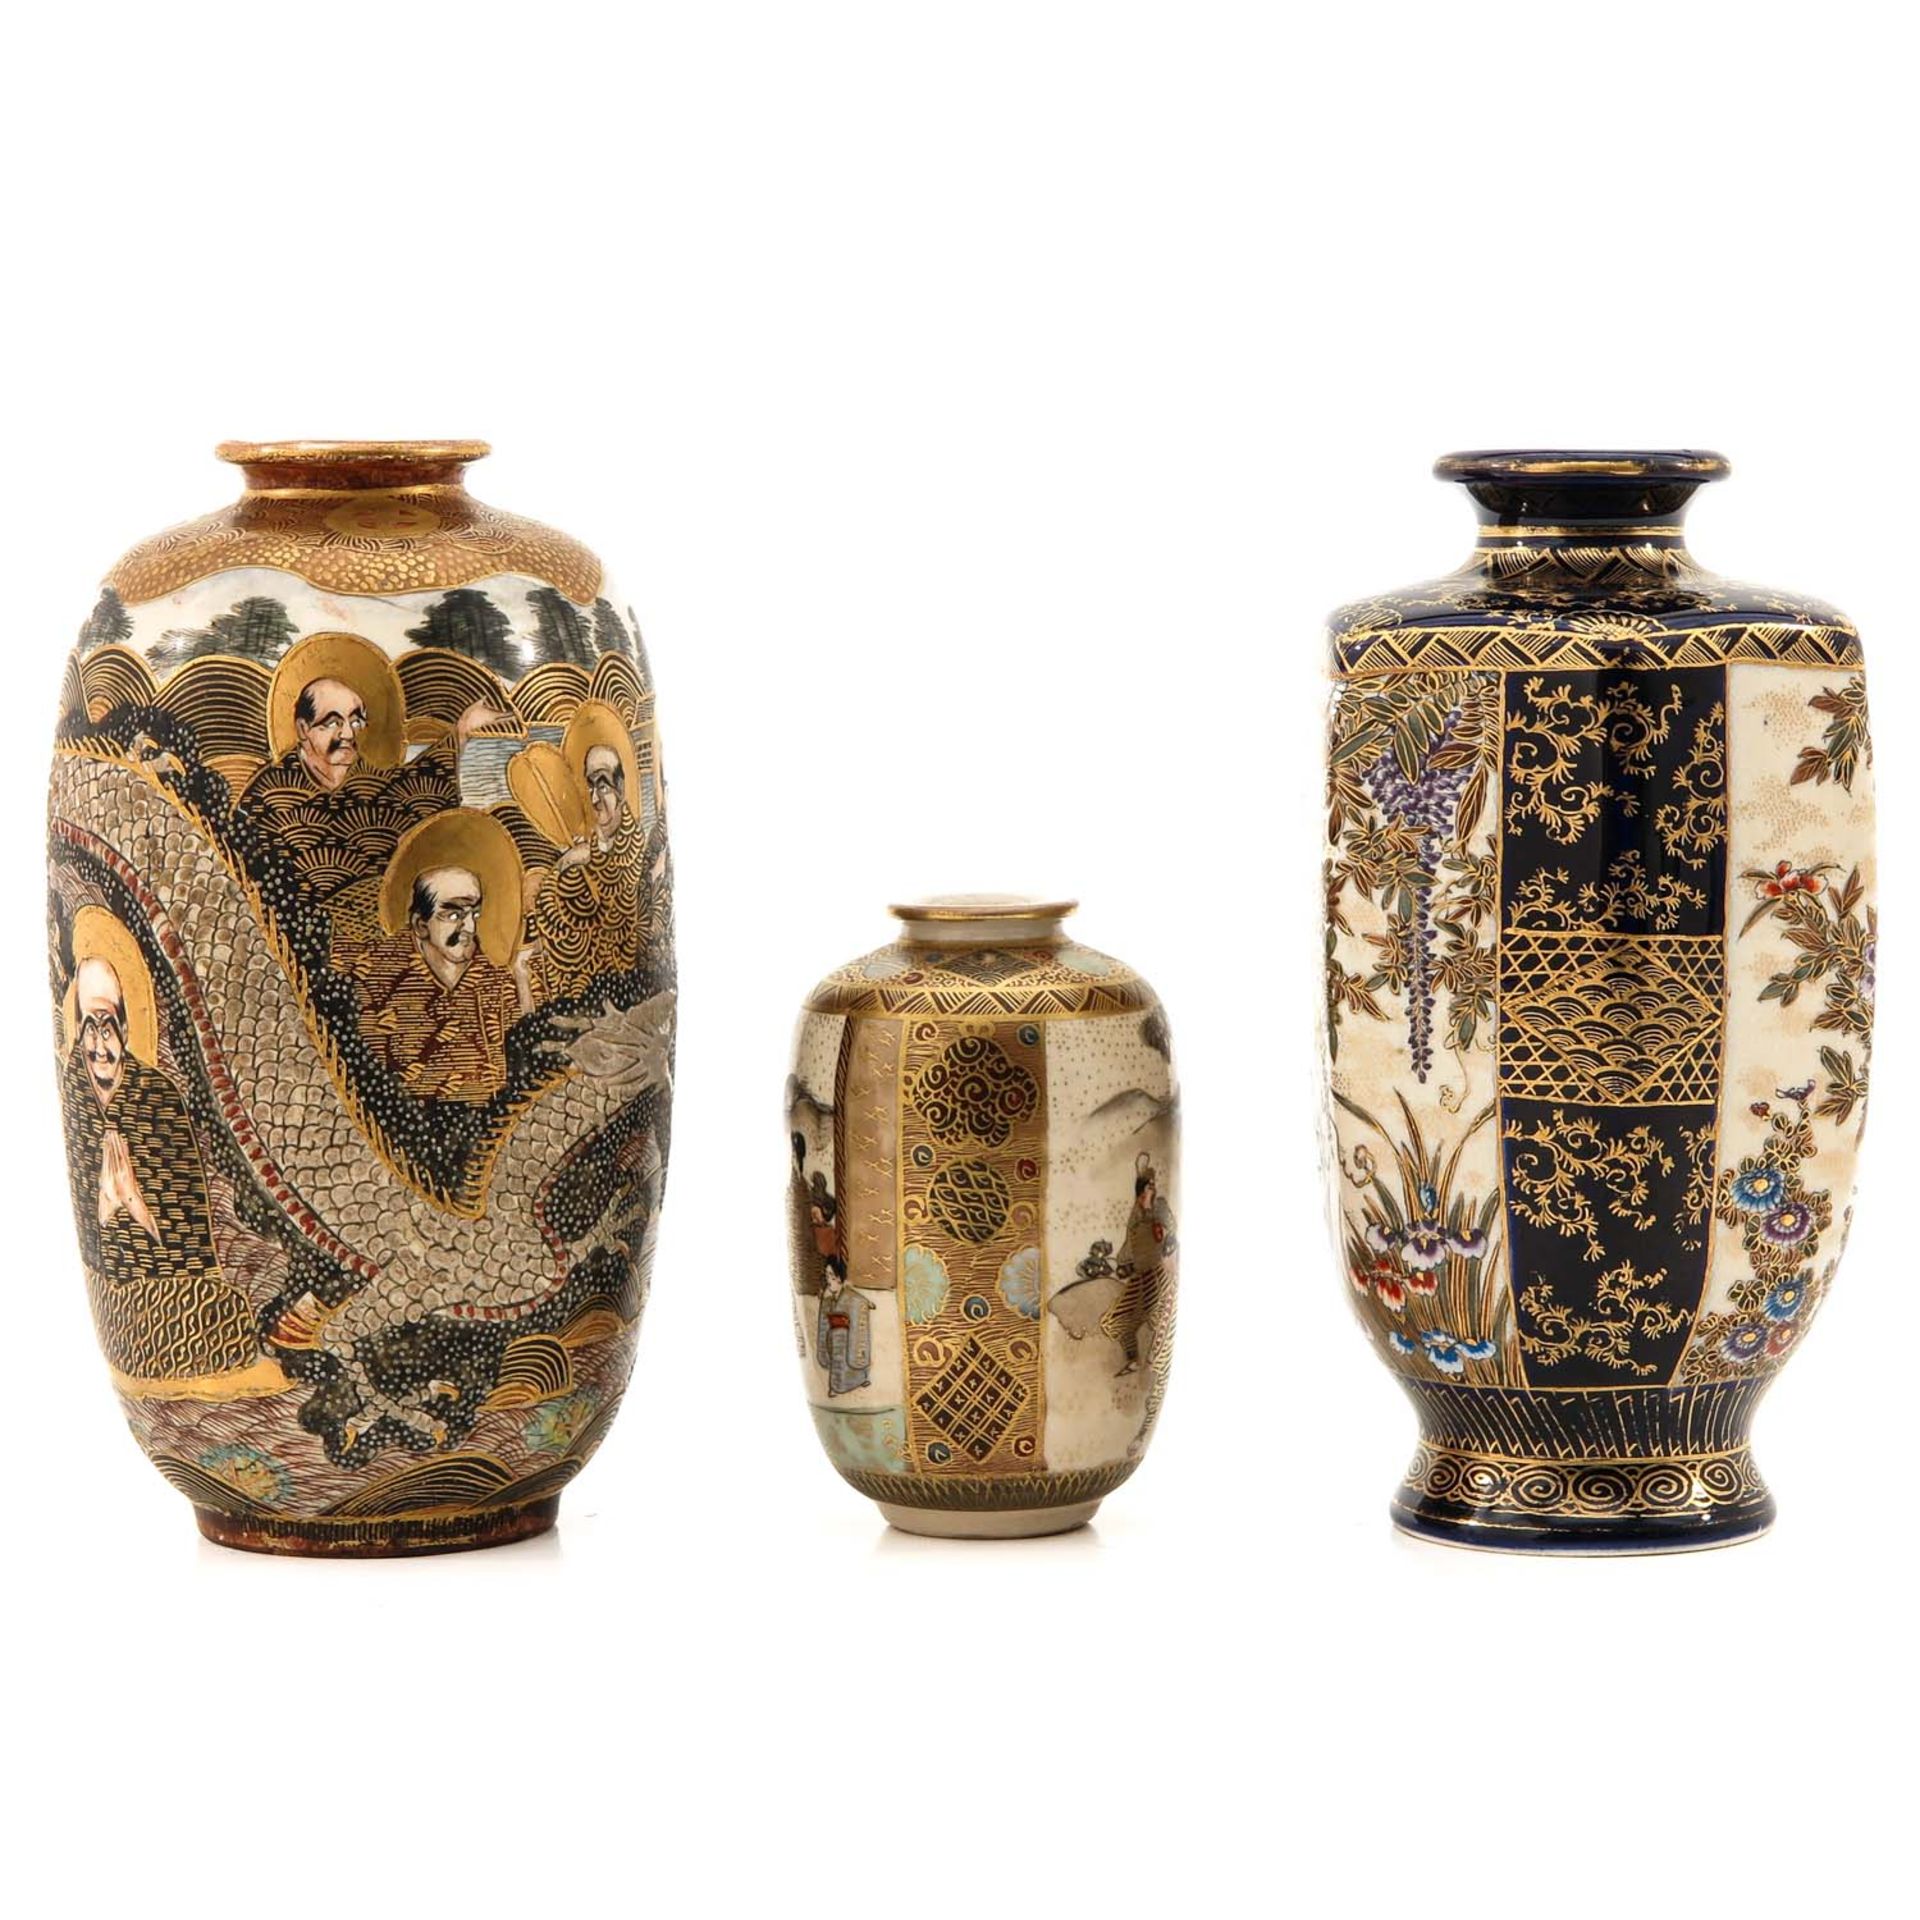 A Collection of 3 Satsuma Vases - Image 4 of 10